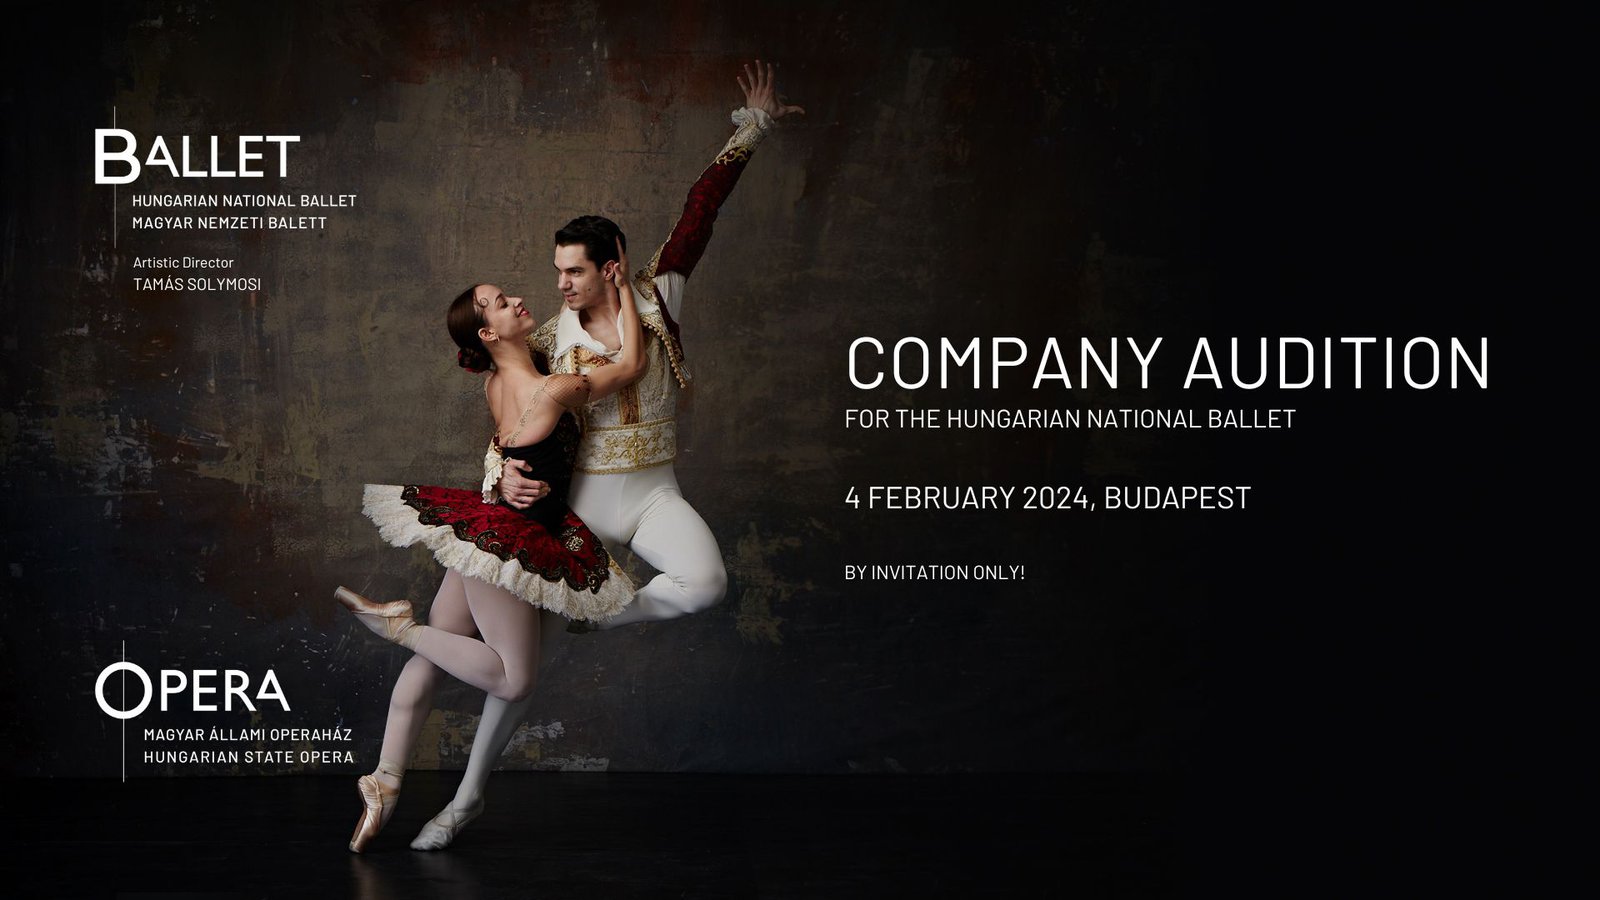 The Hungarian National Ballet